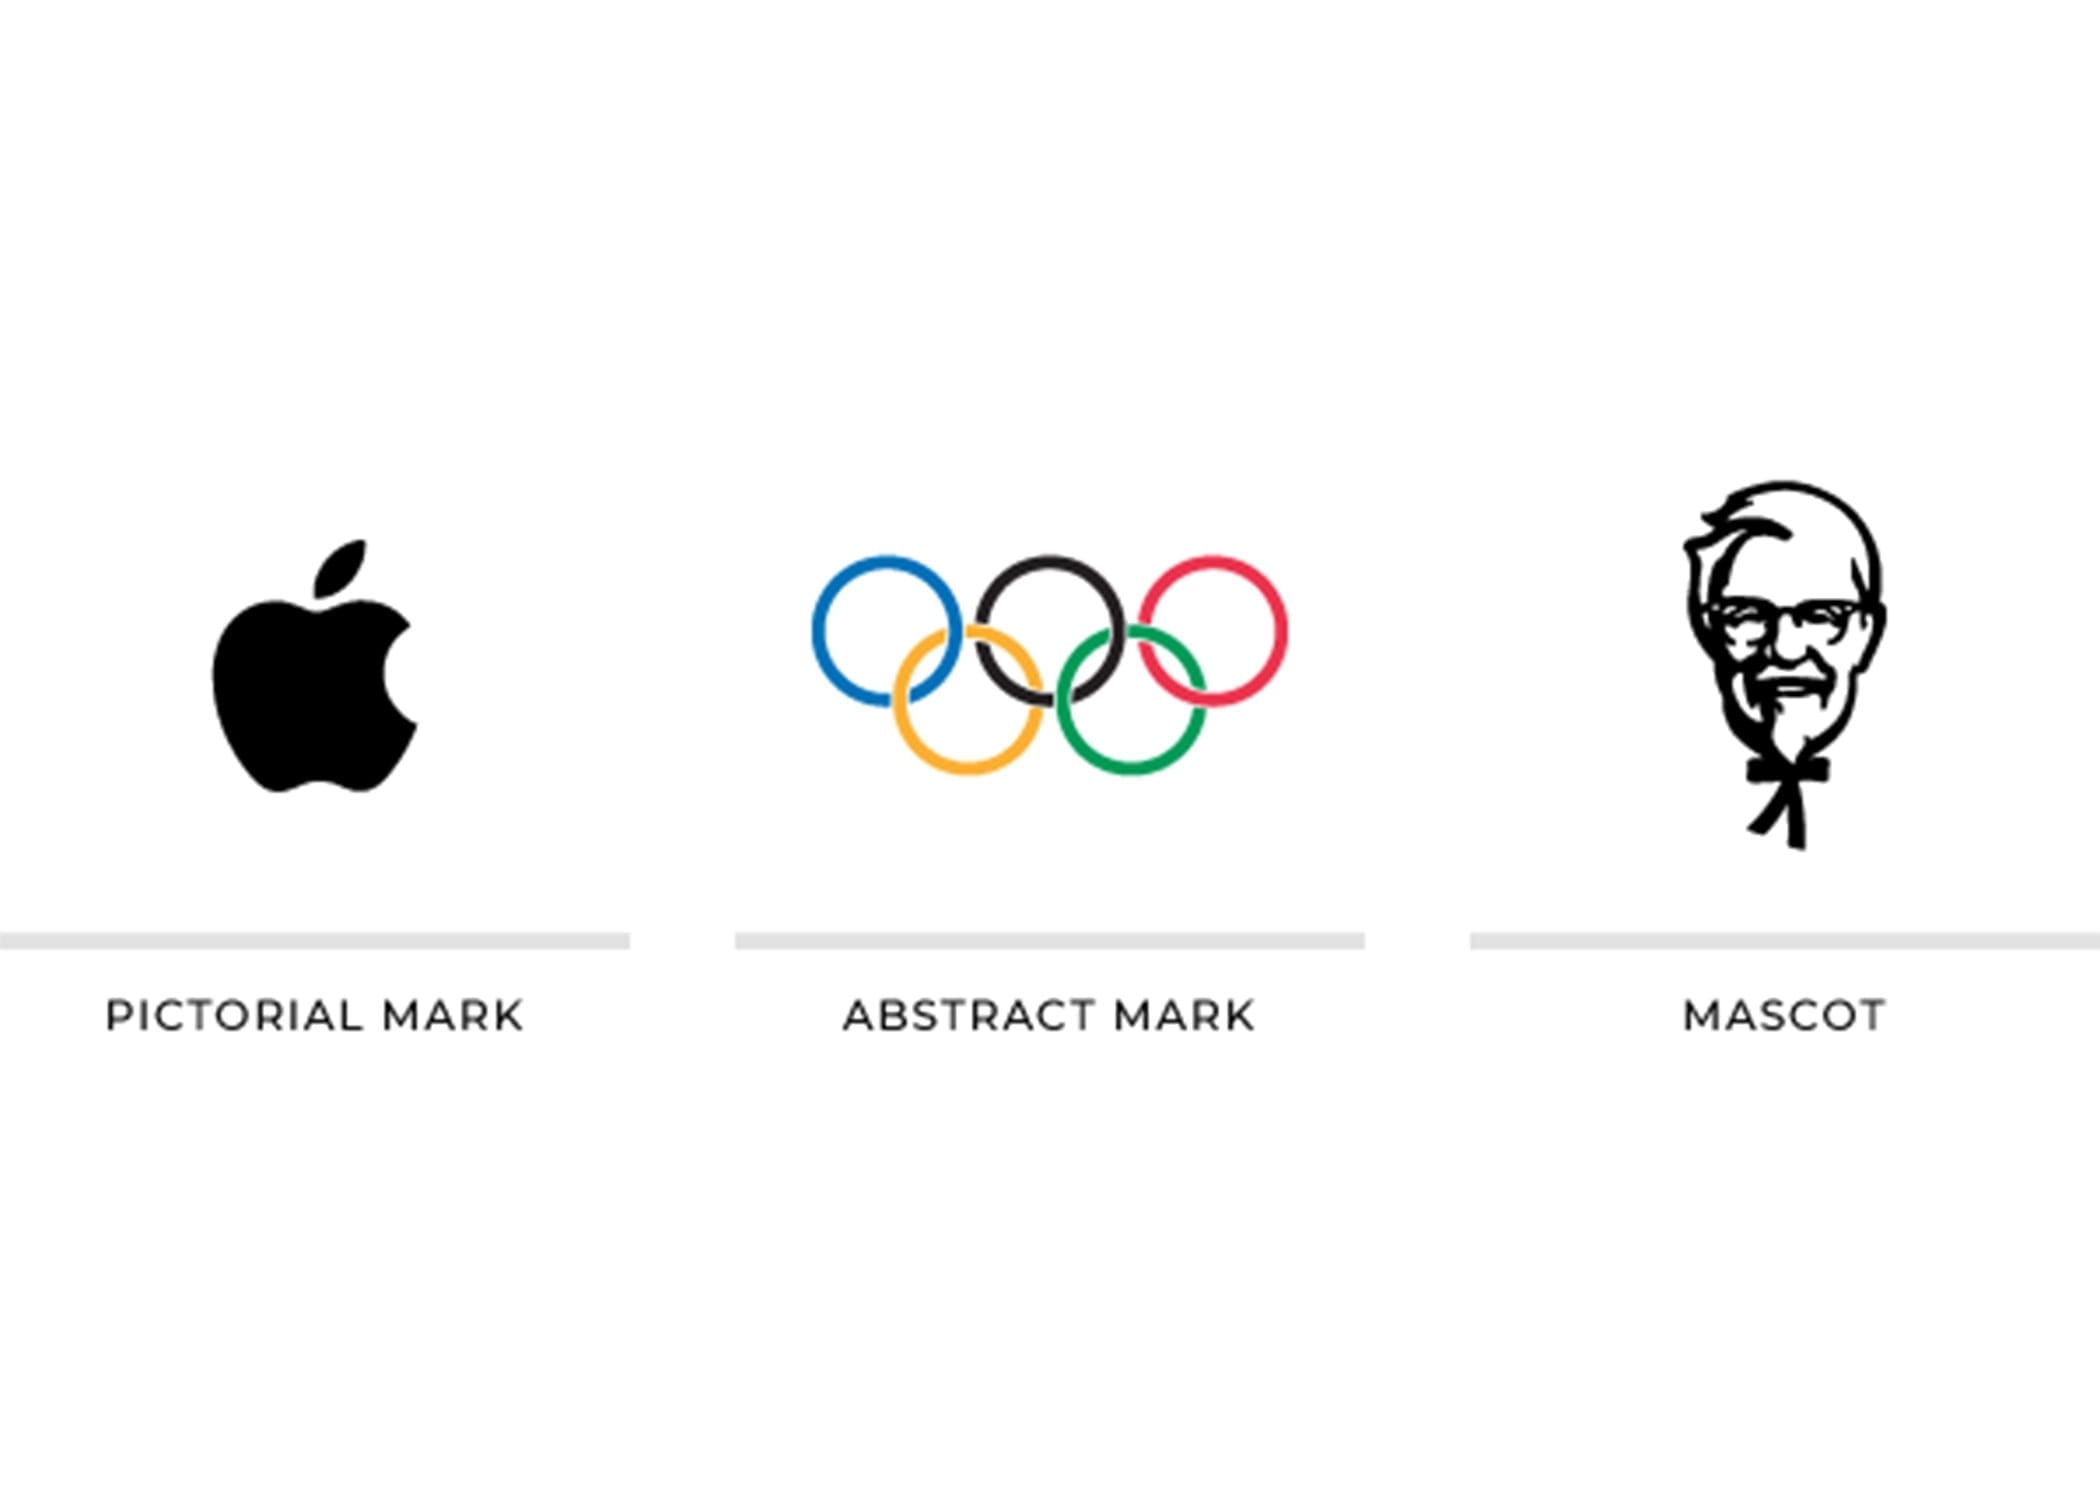 image driven logo examples